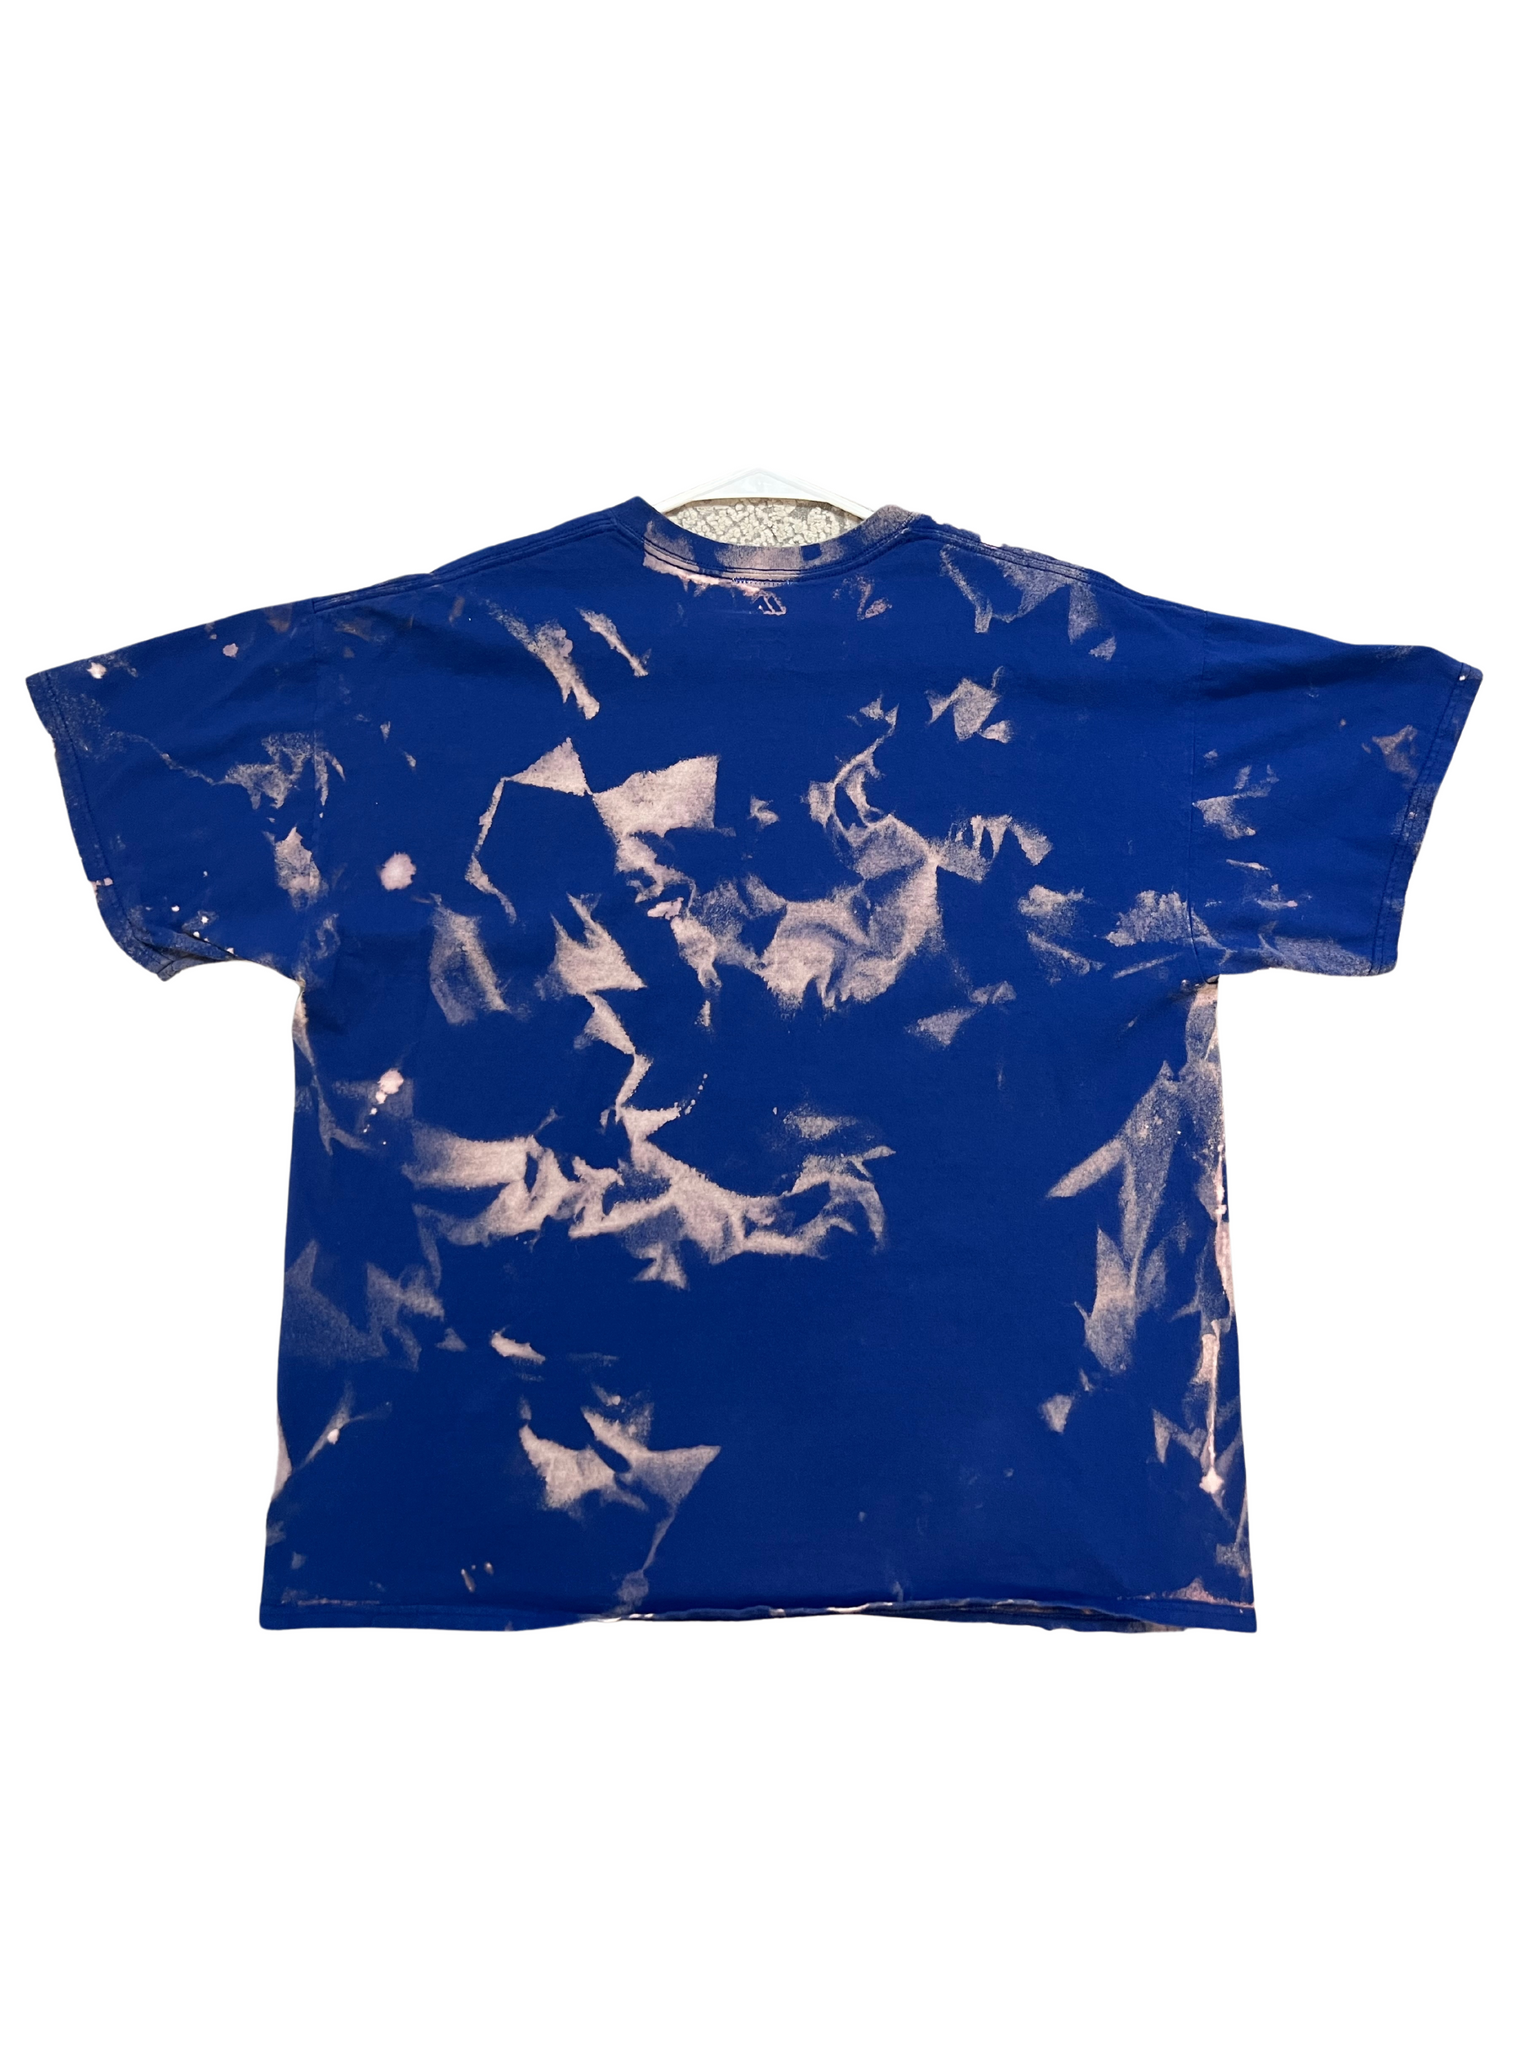 Chicago Cubs National League Champions Bleached Shirt